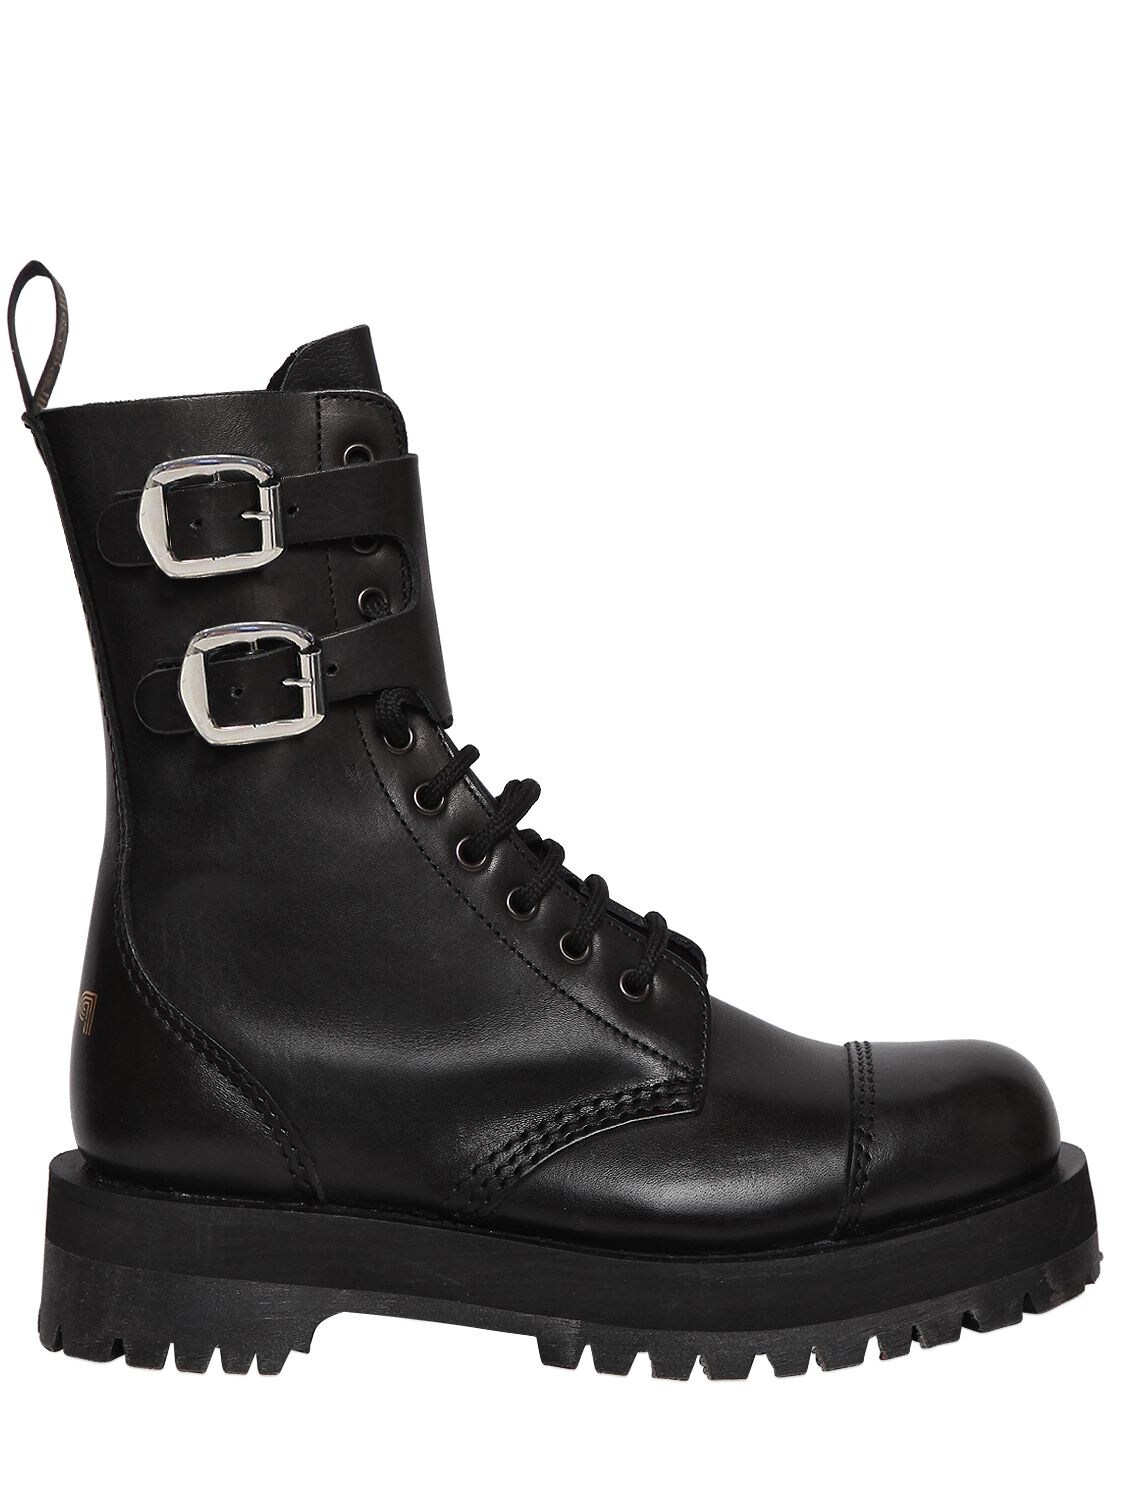 black double sole hiking sneaker boots